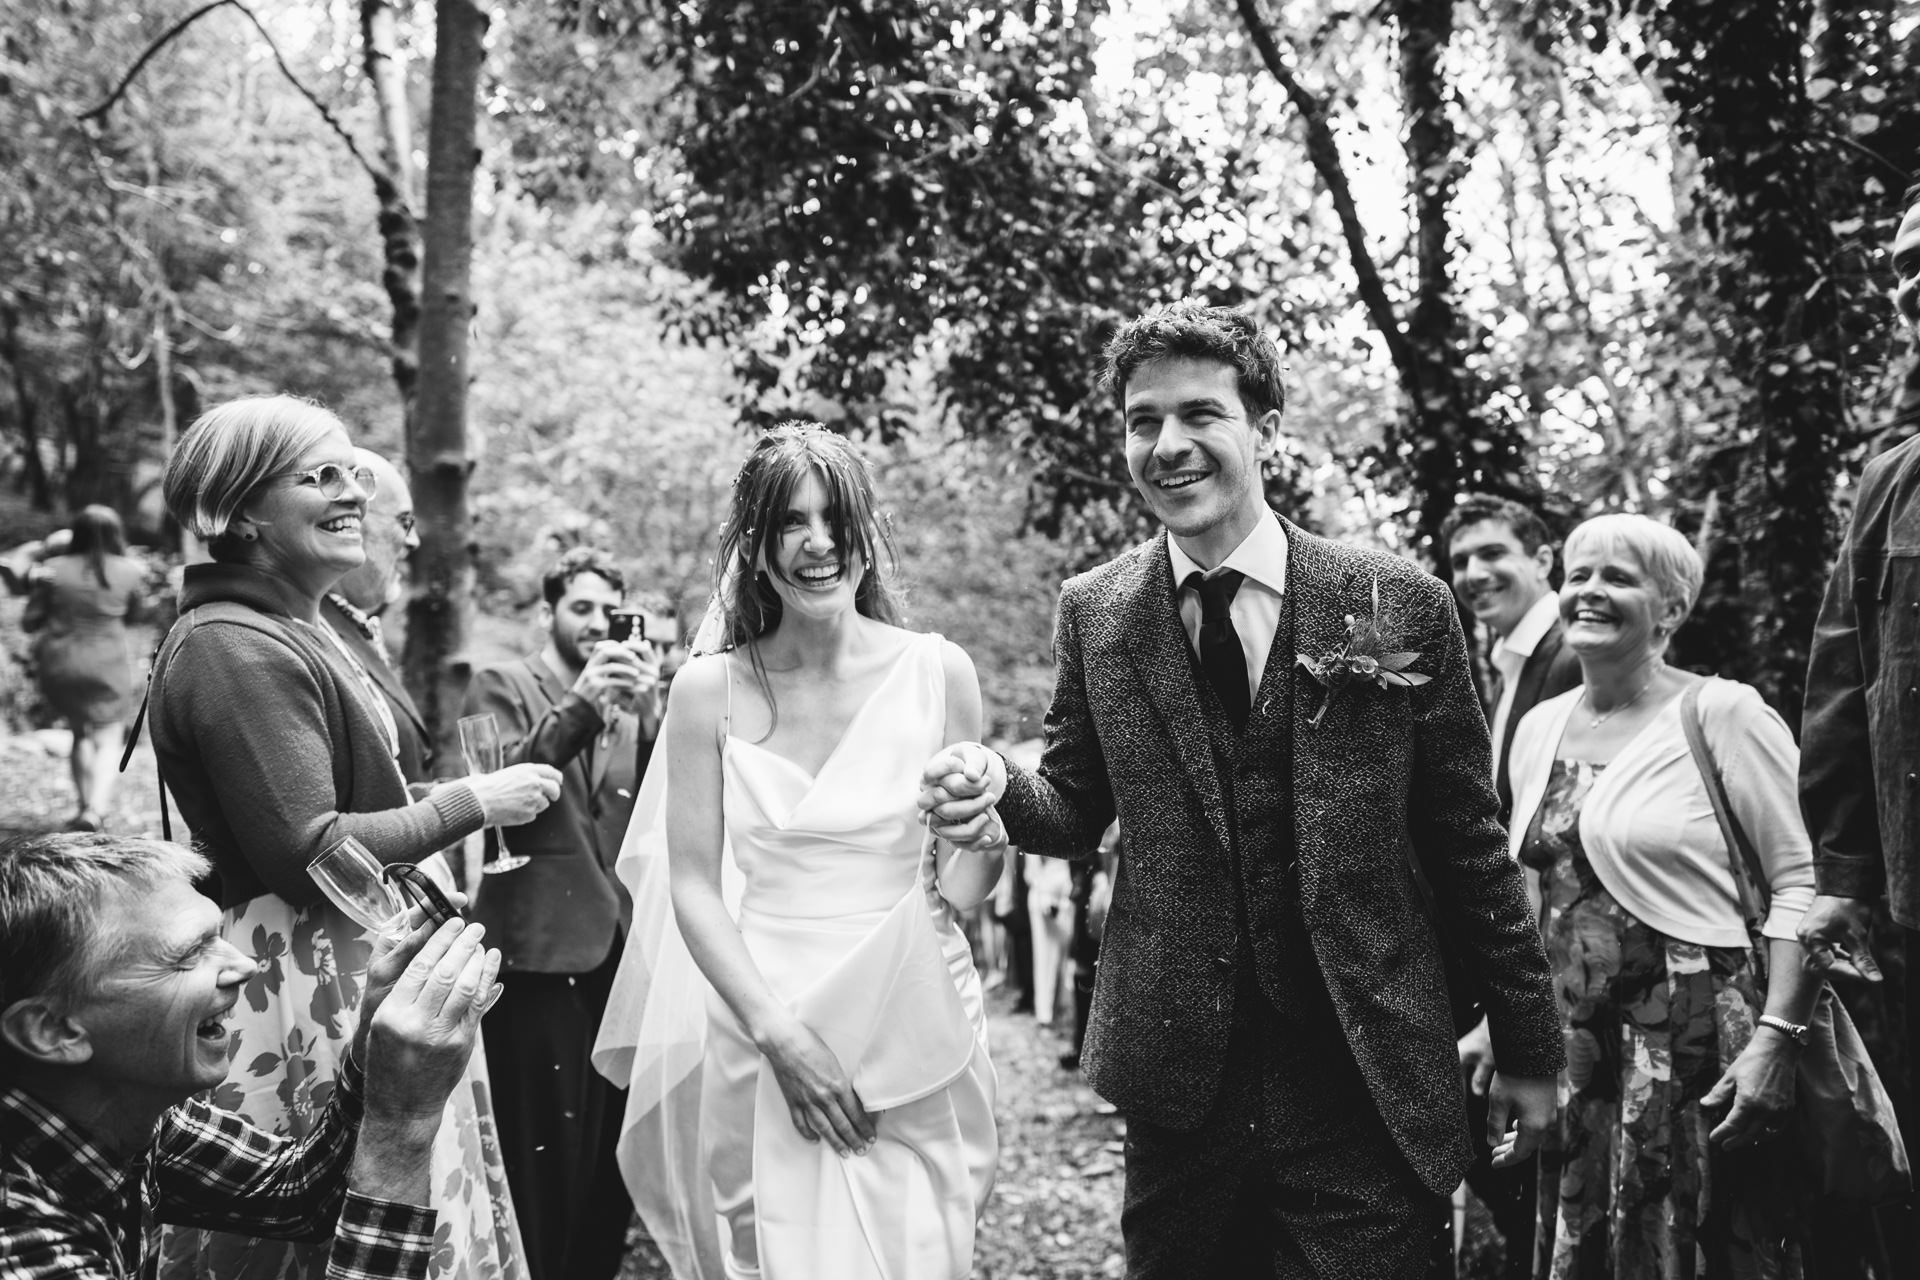 A bride in Vivienne Westwood and groom in a bespoke Casely Hayford suit laughing as guests throw confetti at them in the woodland on Dartmoor